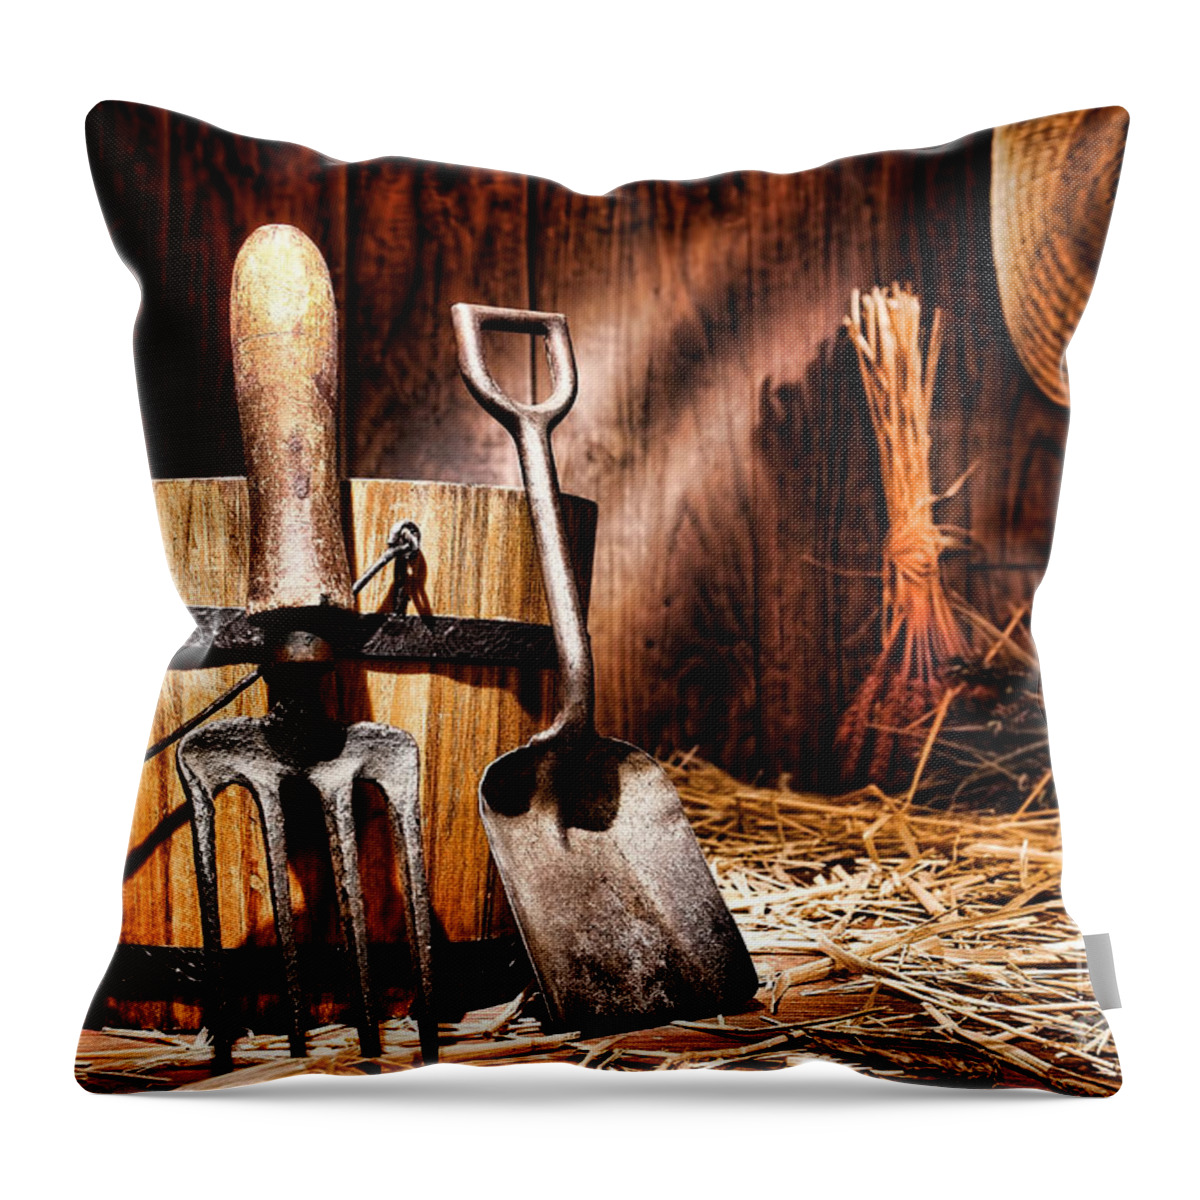 Gardening Throw Pillow featuring the photograph Antique Gardening Tools by Olivier Le Queinec